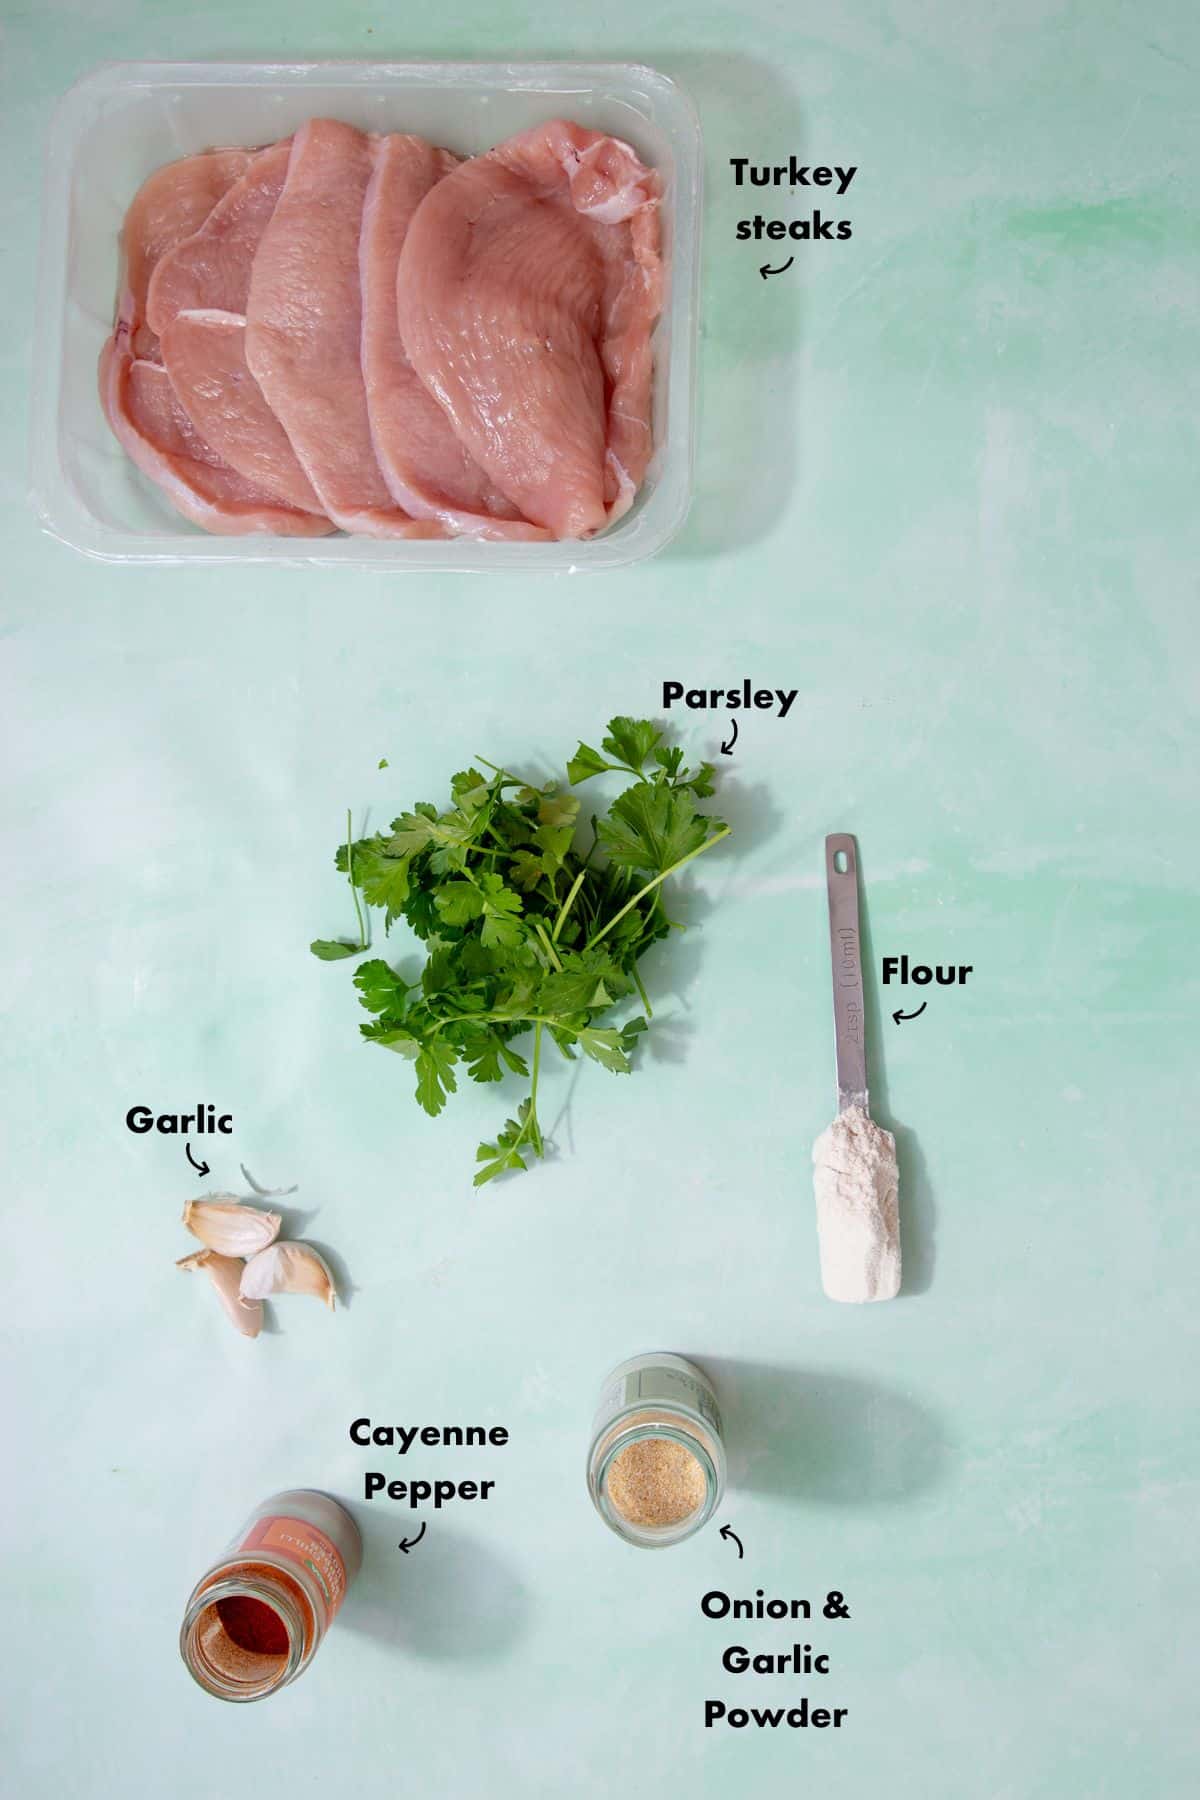 Ingredients to make the turkey steak recipe laid out on a pale blue background and labelled.